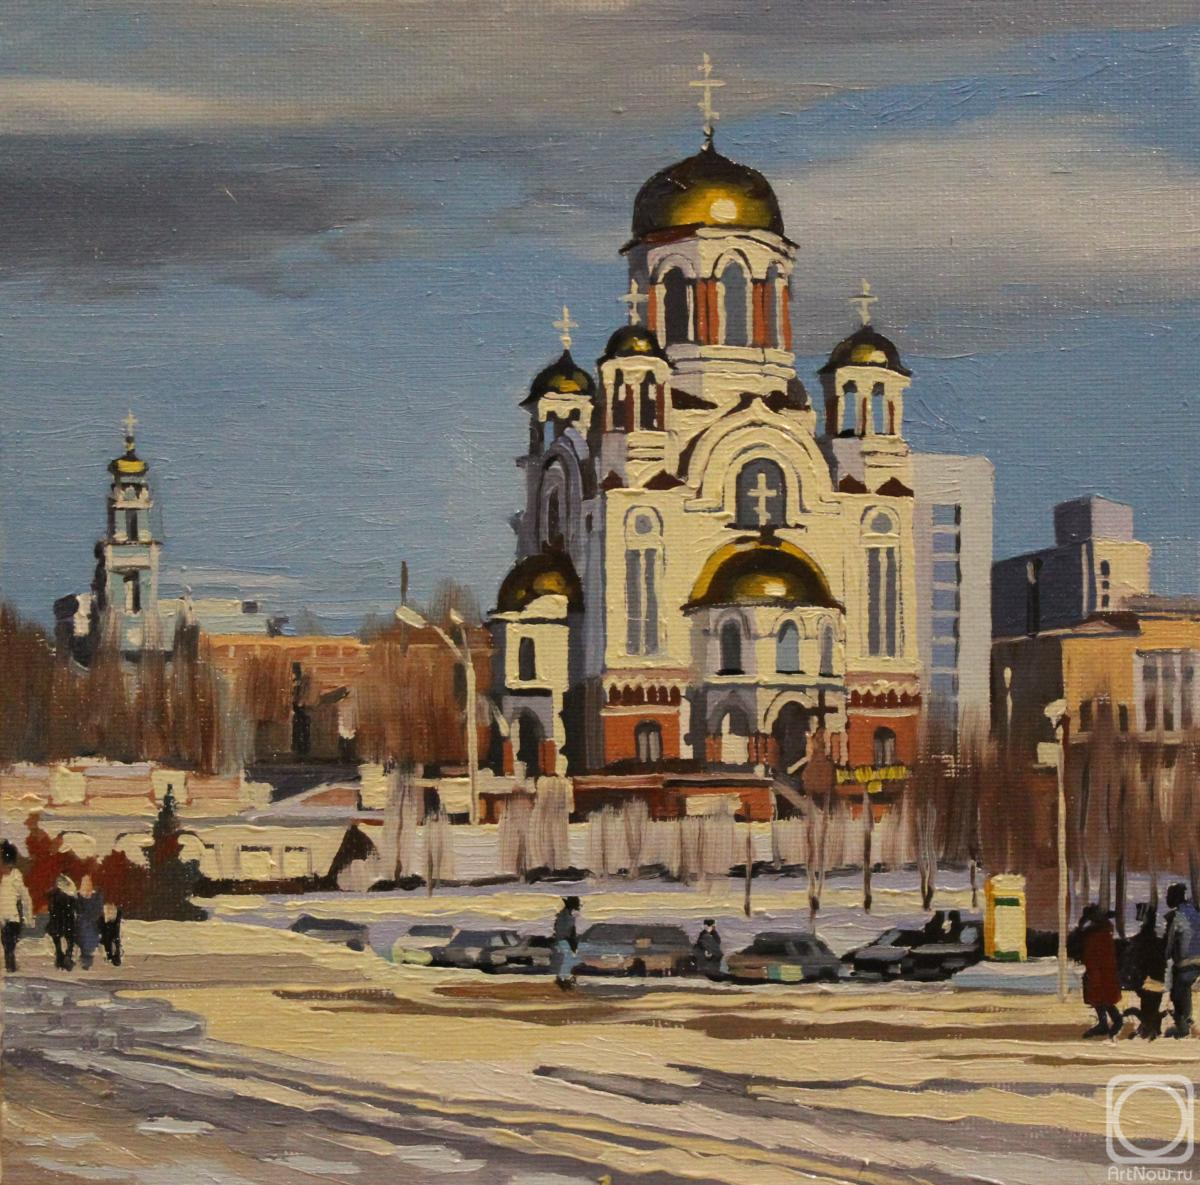 Sergeev Andrey. The Temple on Blood